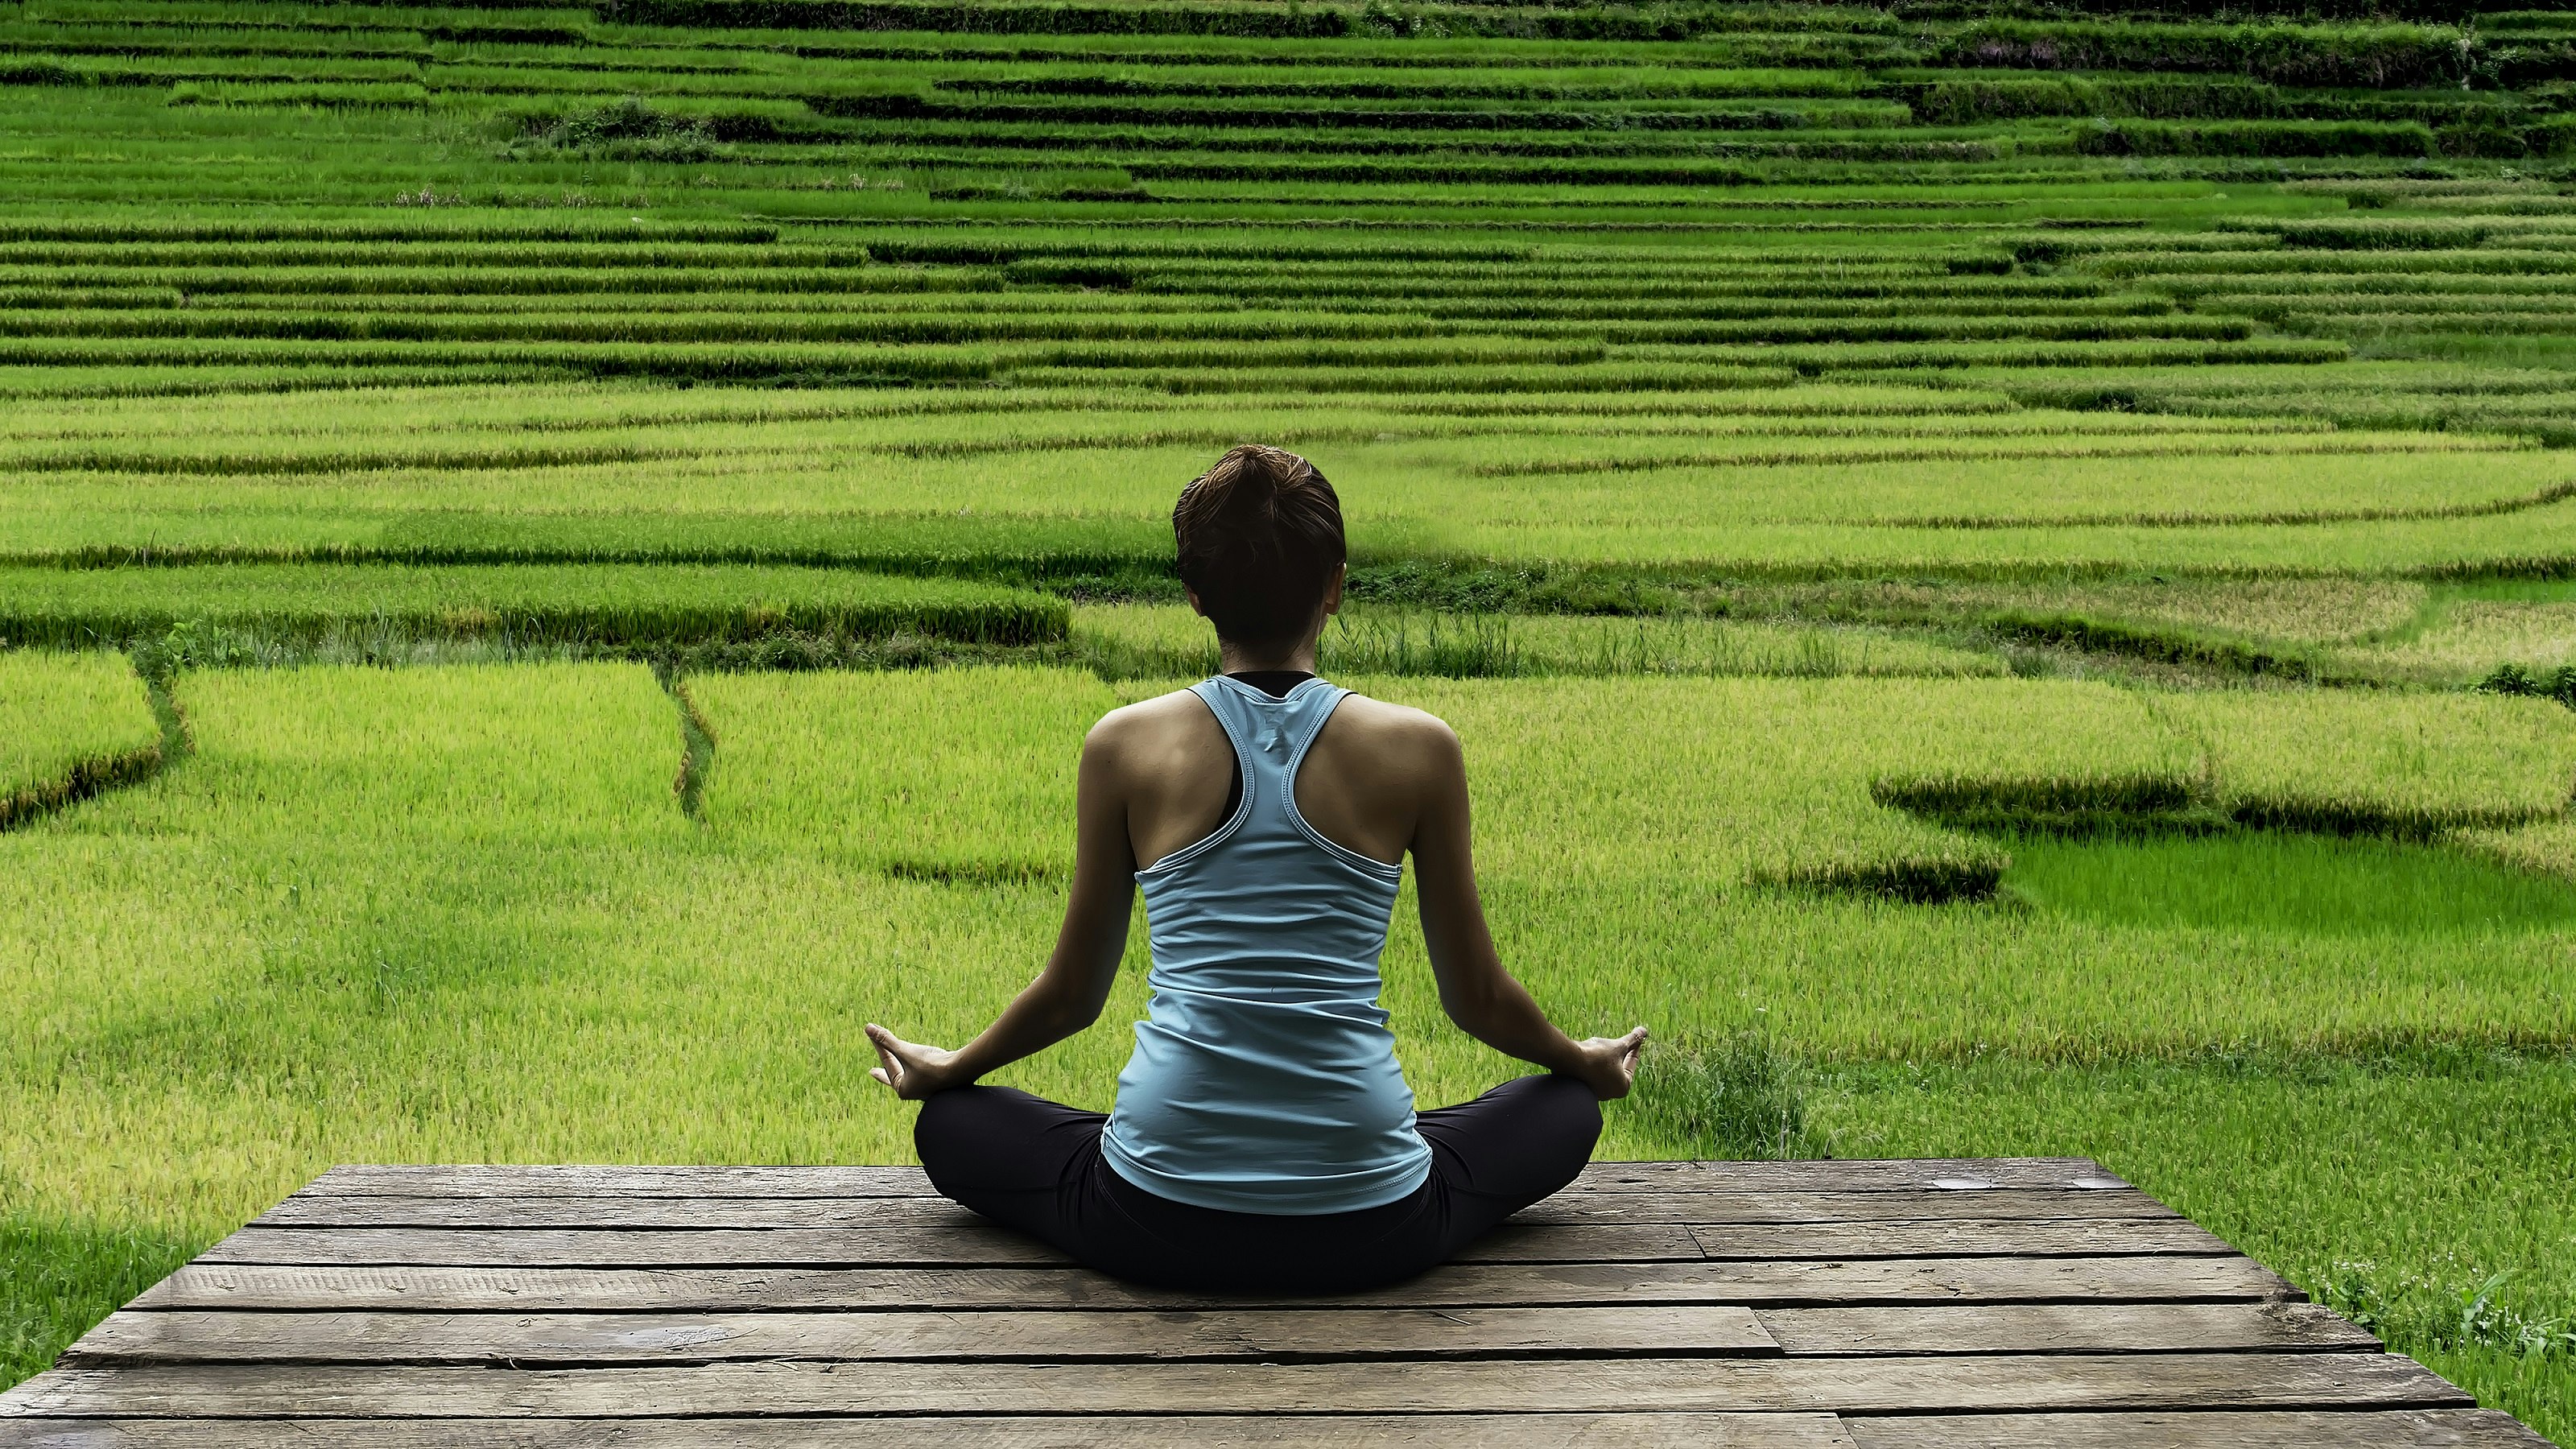 A woman, with her back to camera, sits in a meditative pose with her legs crossed in front of green rice fields in Bali.